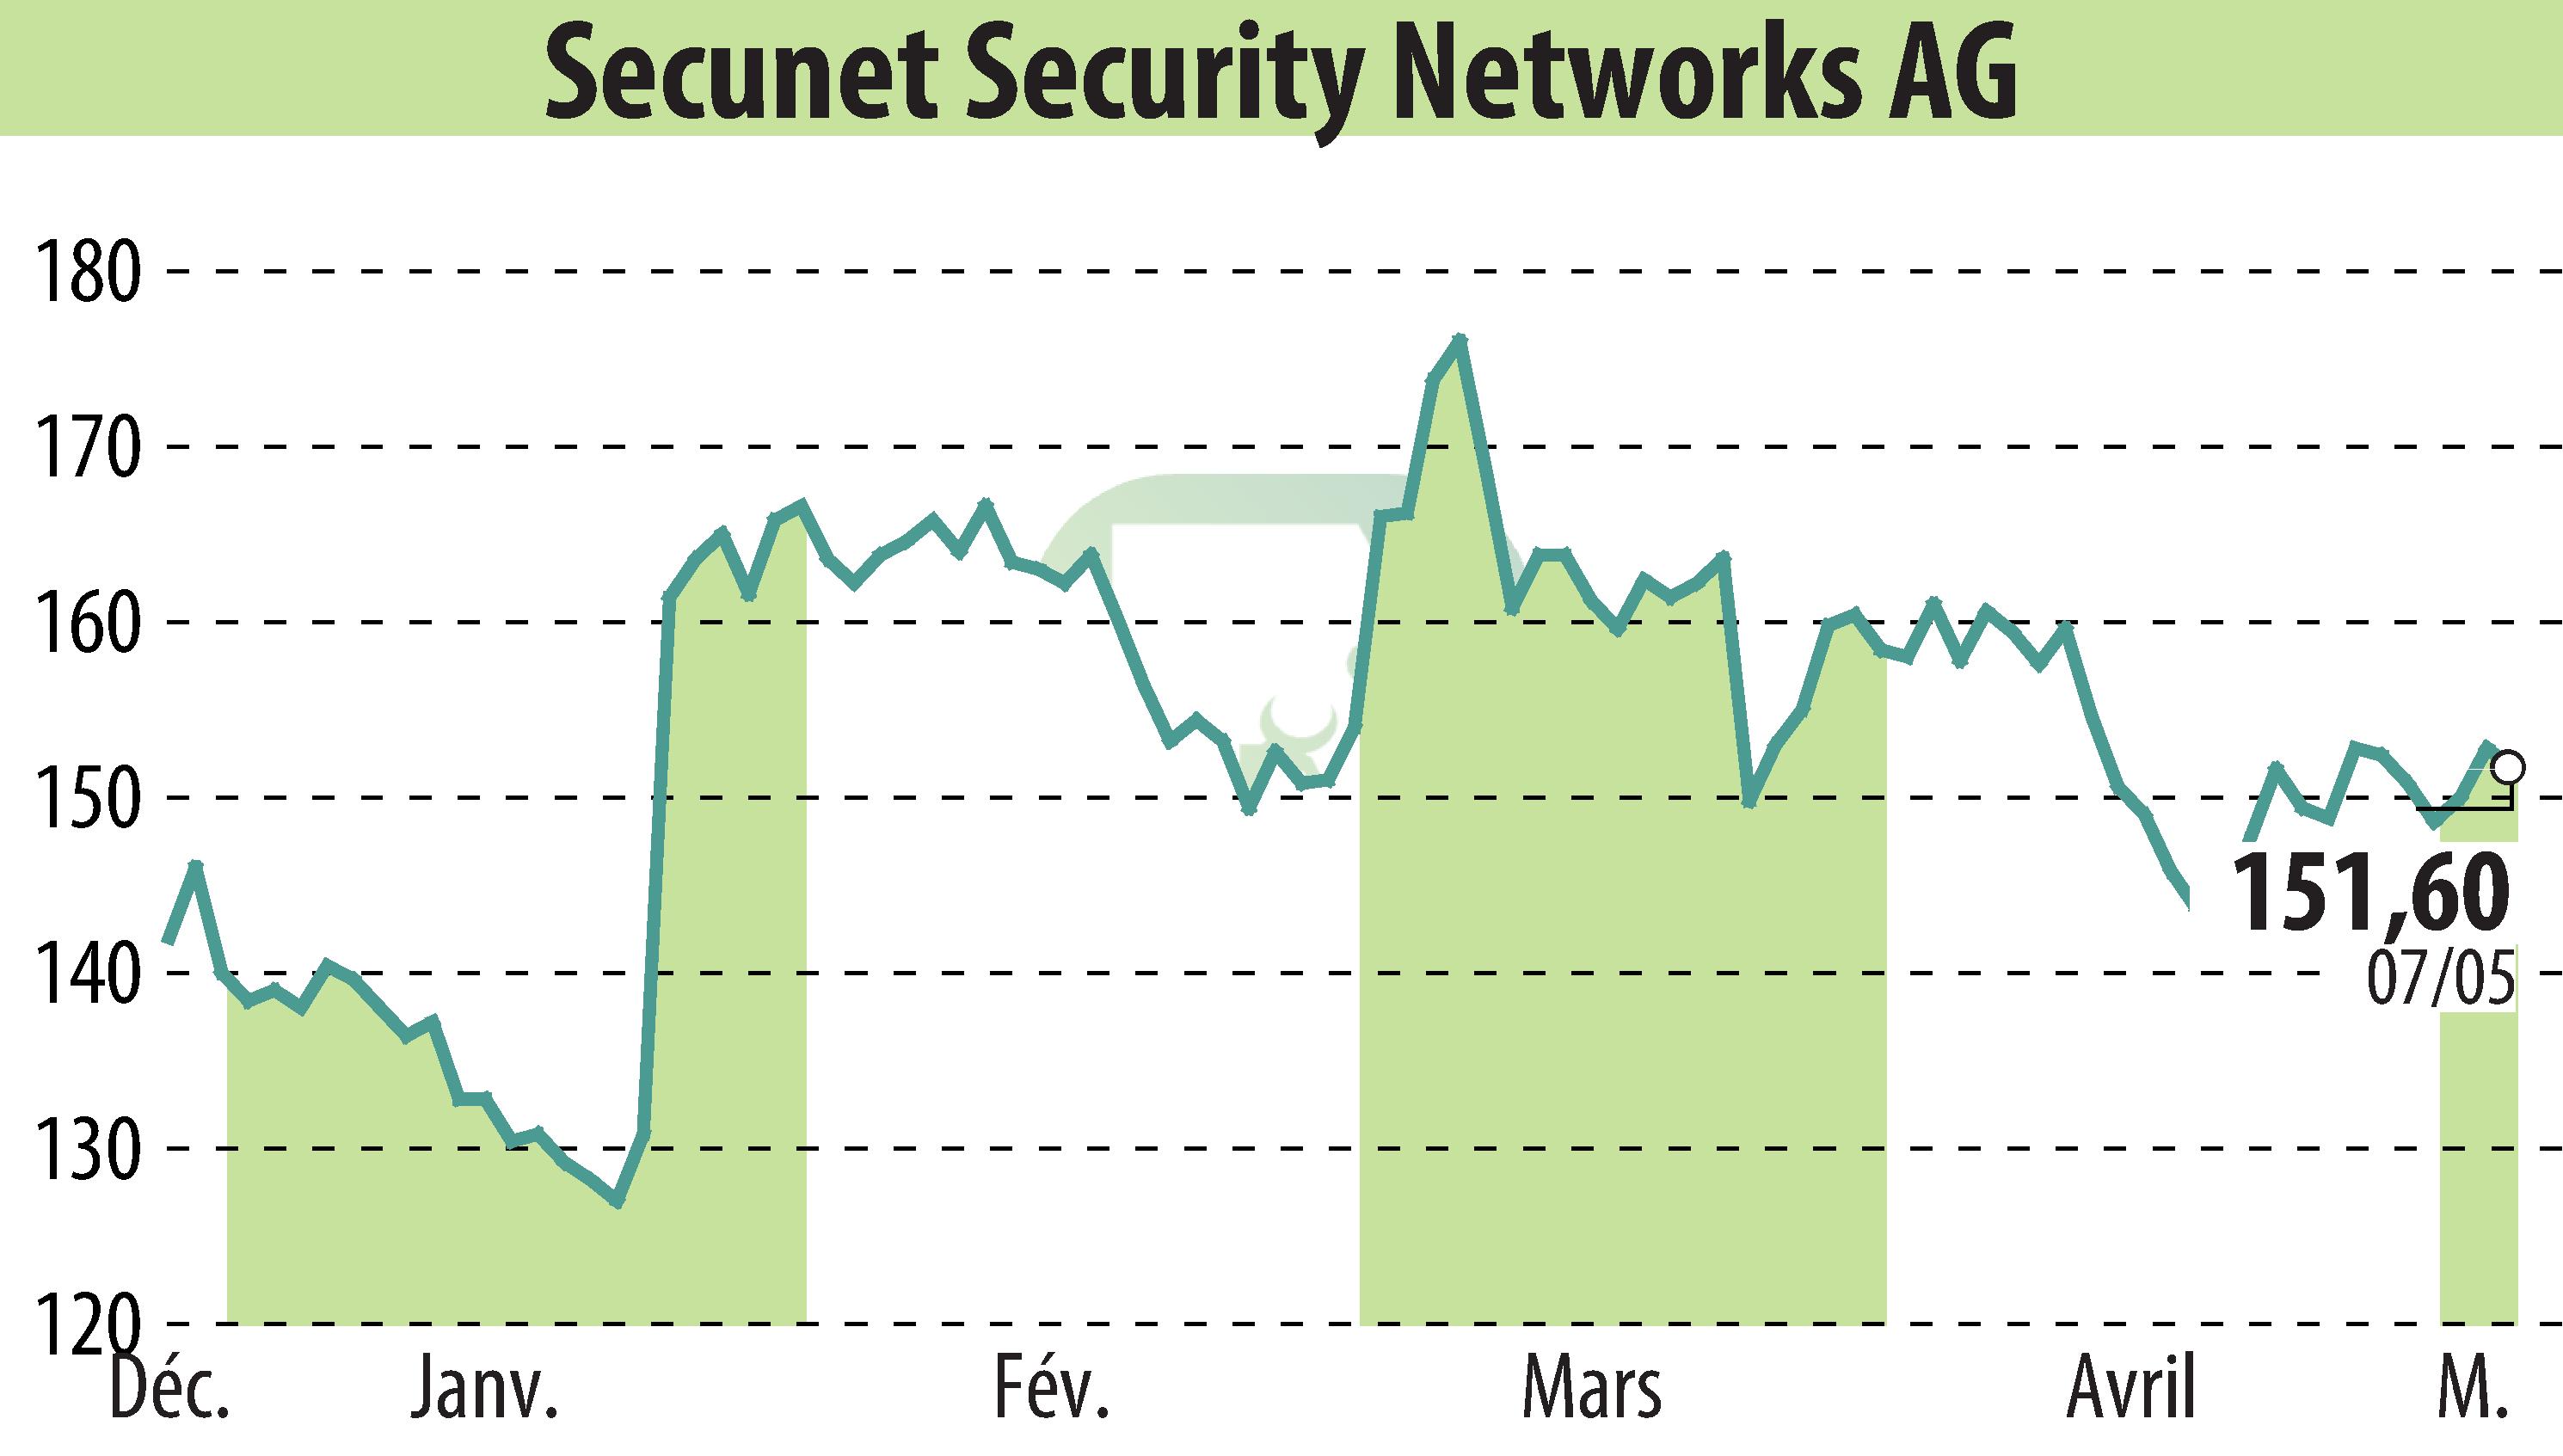 Stock price chart of Secunet Security Networks AG (EBR:YSN) showing fluctuations.